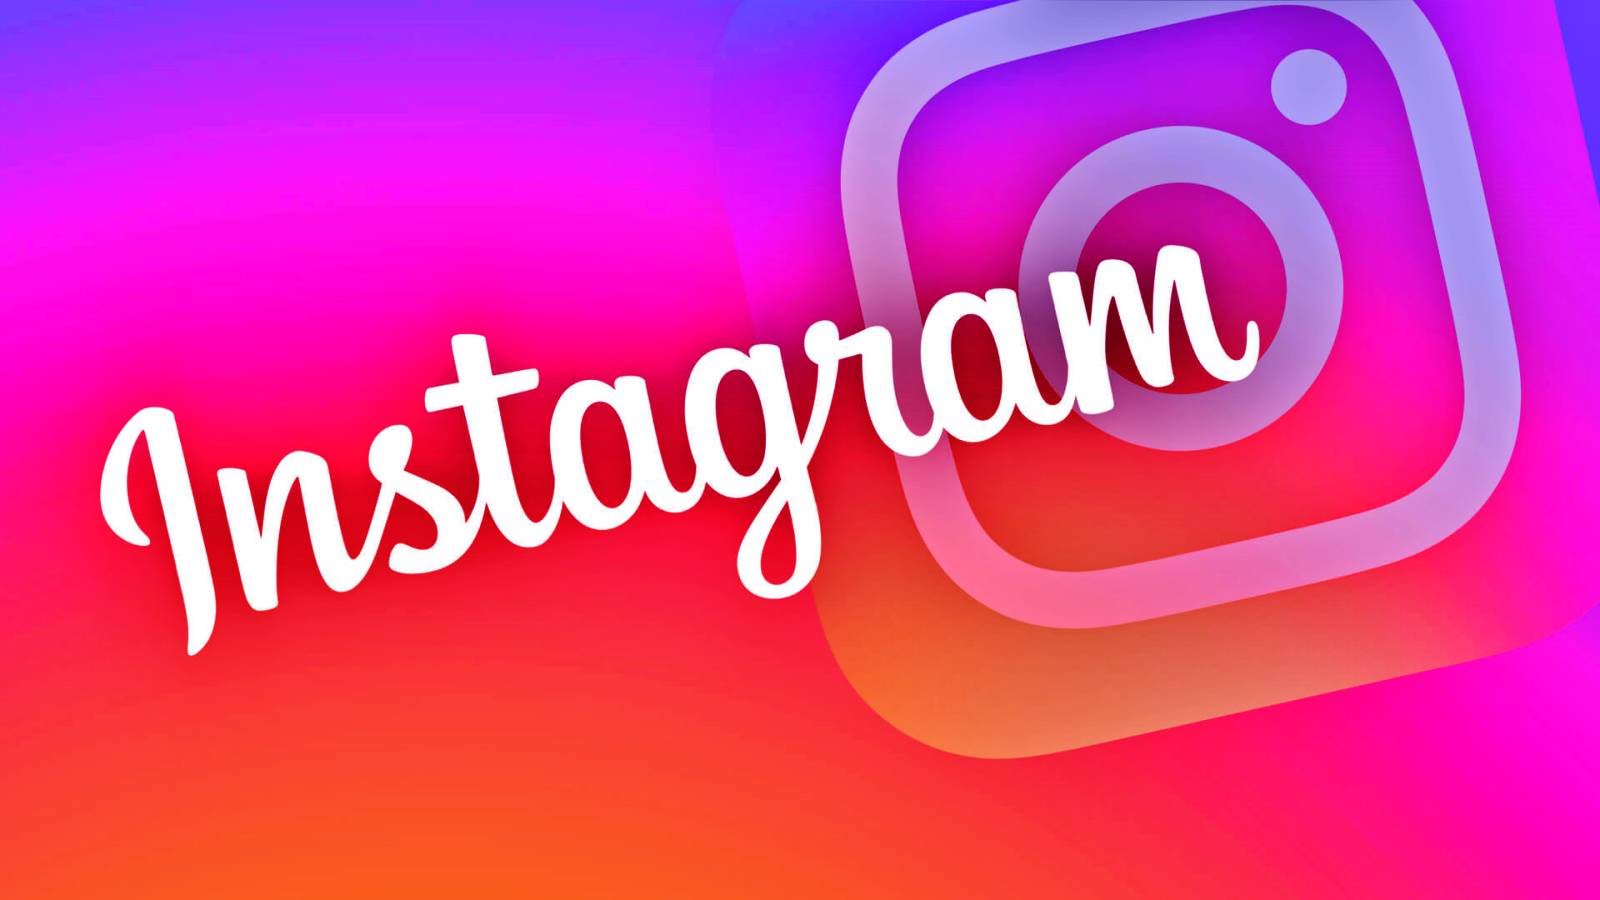 New Instagram Update is Now Available for Phones